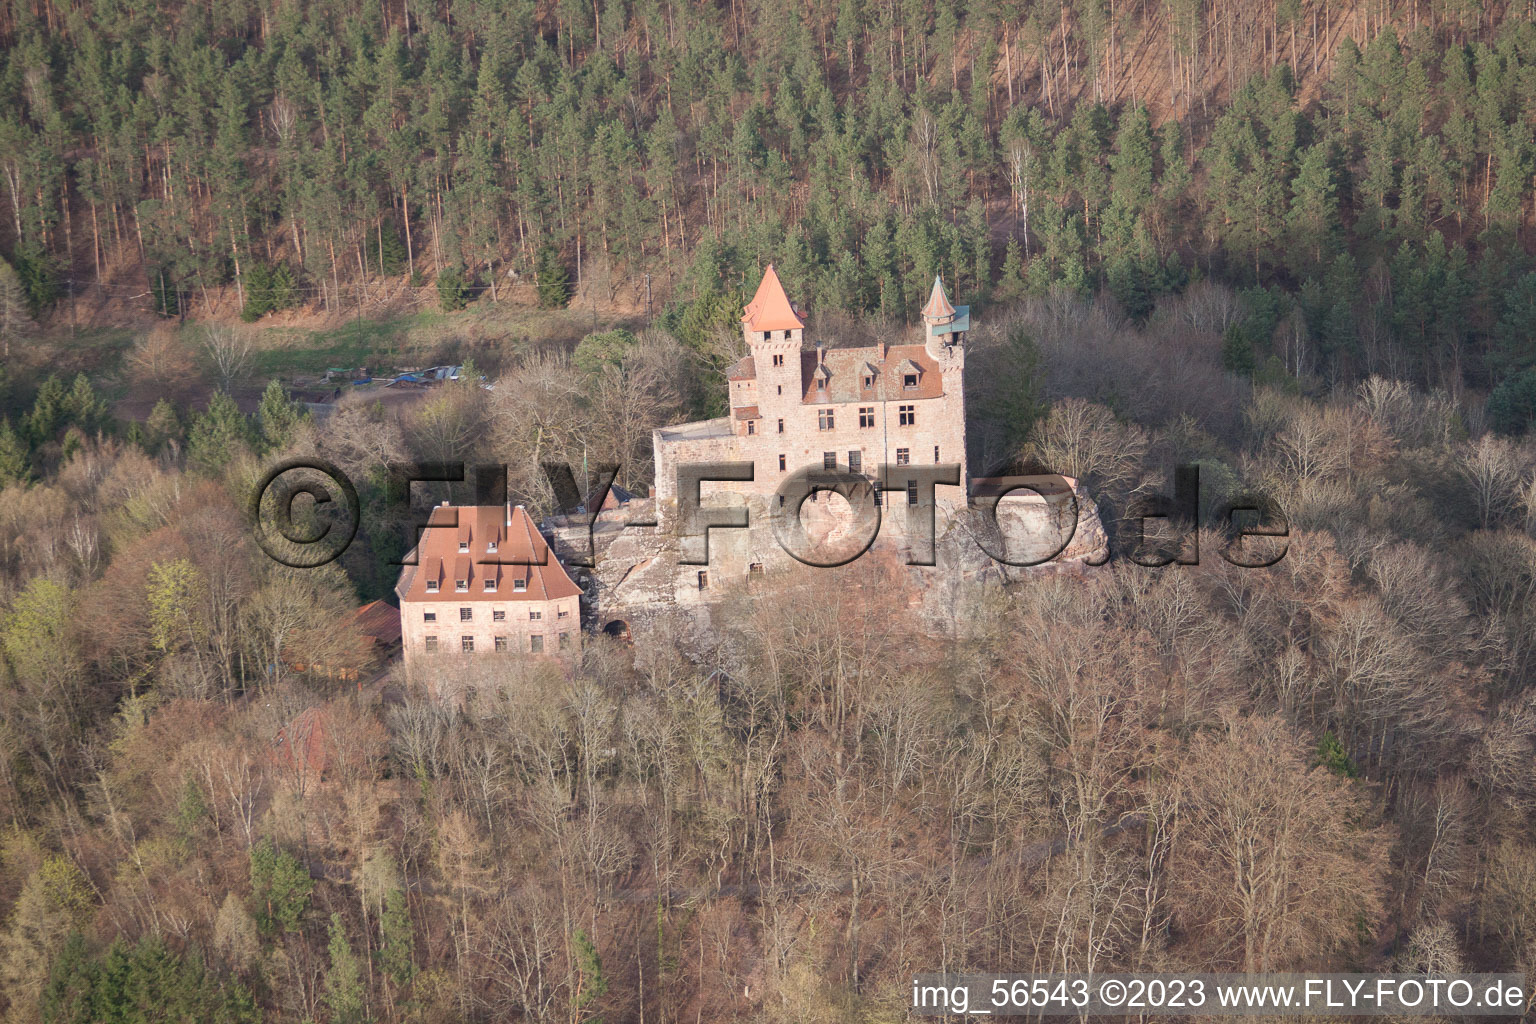 Drone recording of Erlenbach bei Dahn in the state Rhineland-Palatinate, Germany